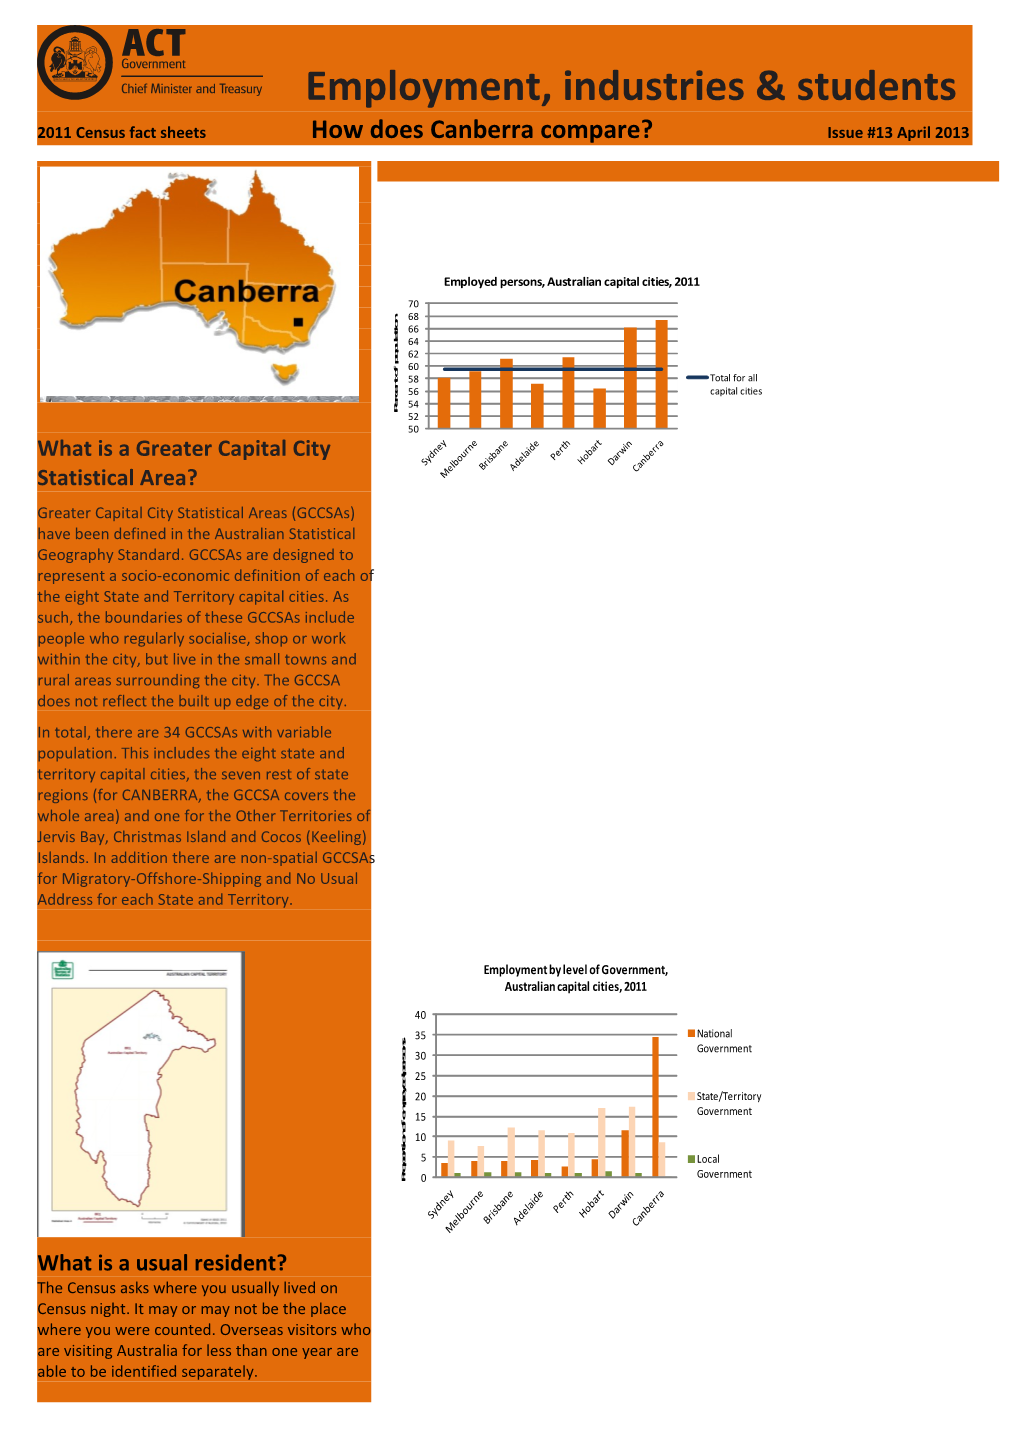 Employment, Industries and Personal Income- How Does Canberra Compare - Census Factsheet #8